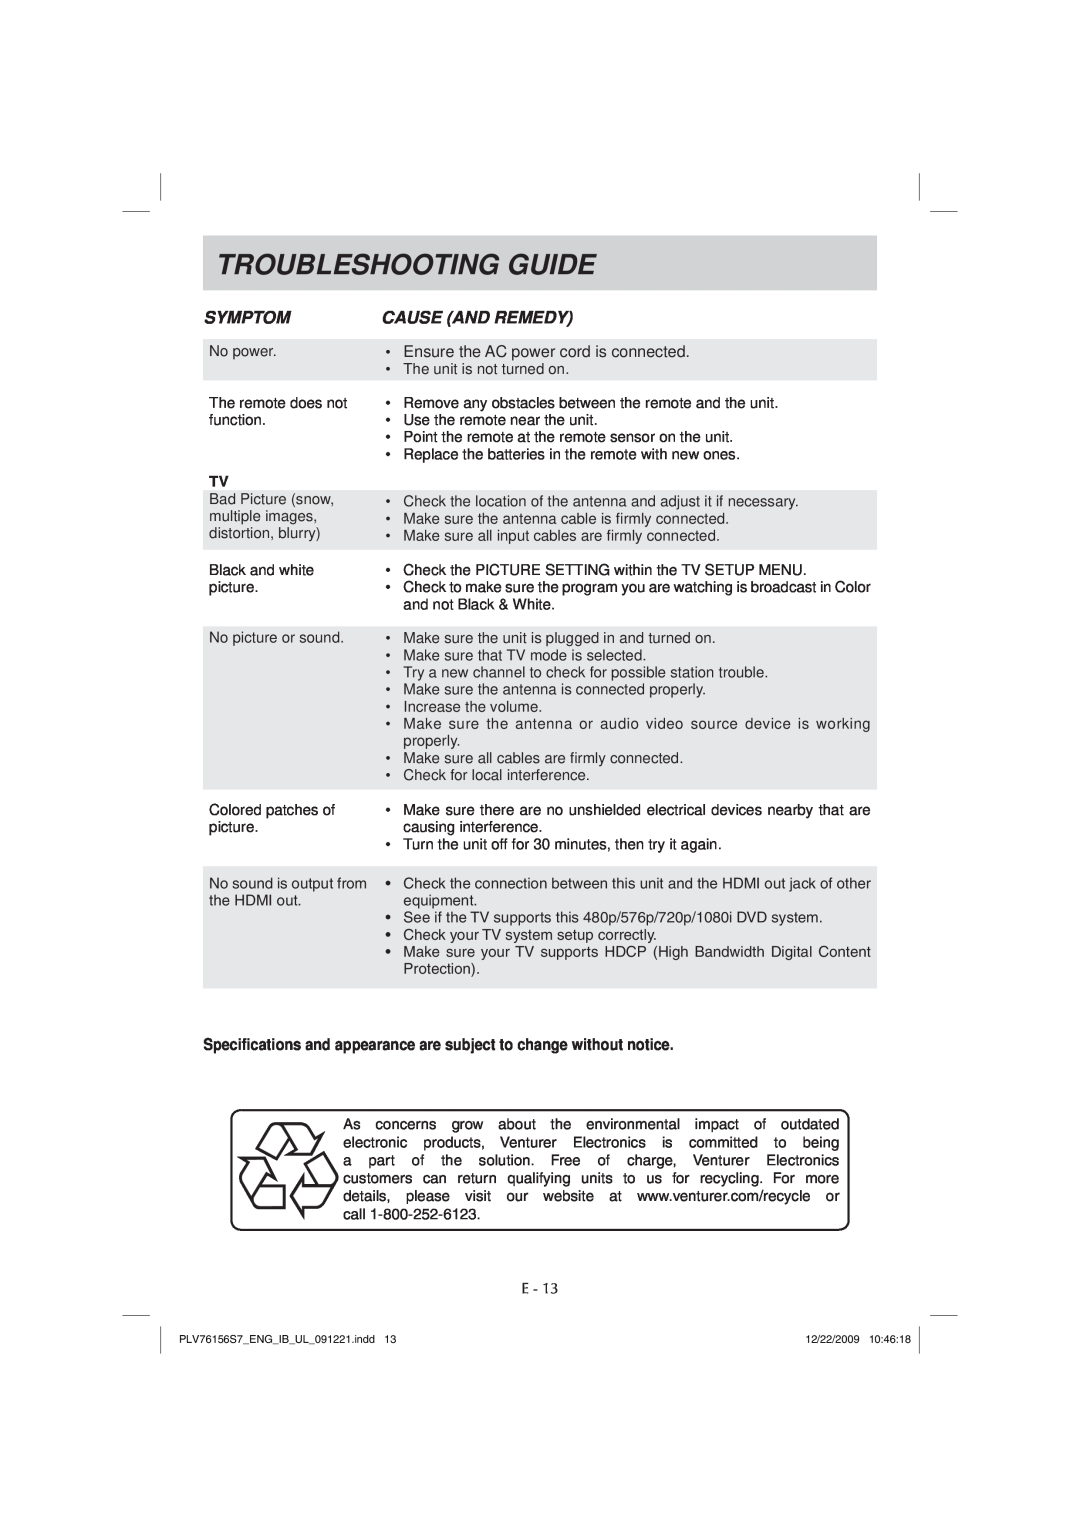 Venturer PLV7615H Troubleshooting Guide, Symptom, Cause And Remedy, Ensure the AC power cord is connected 